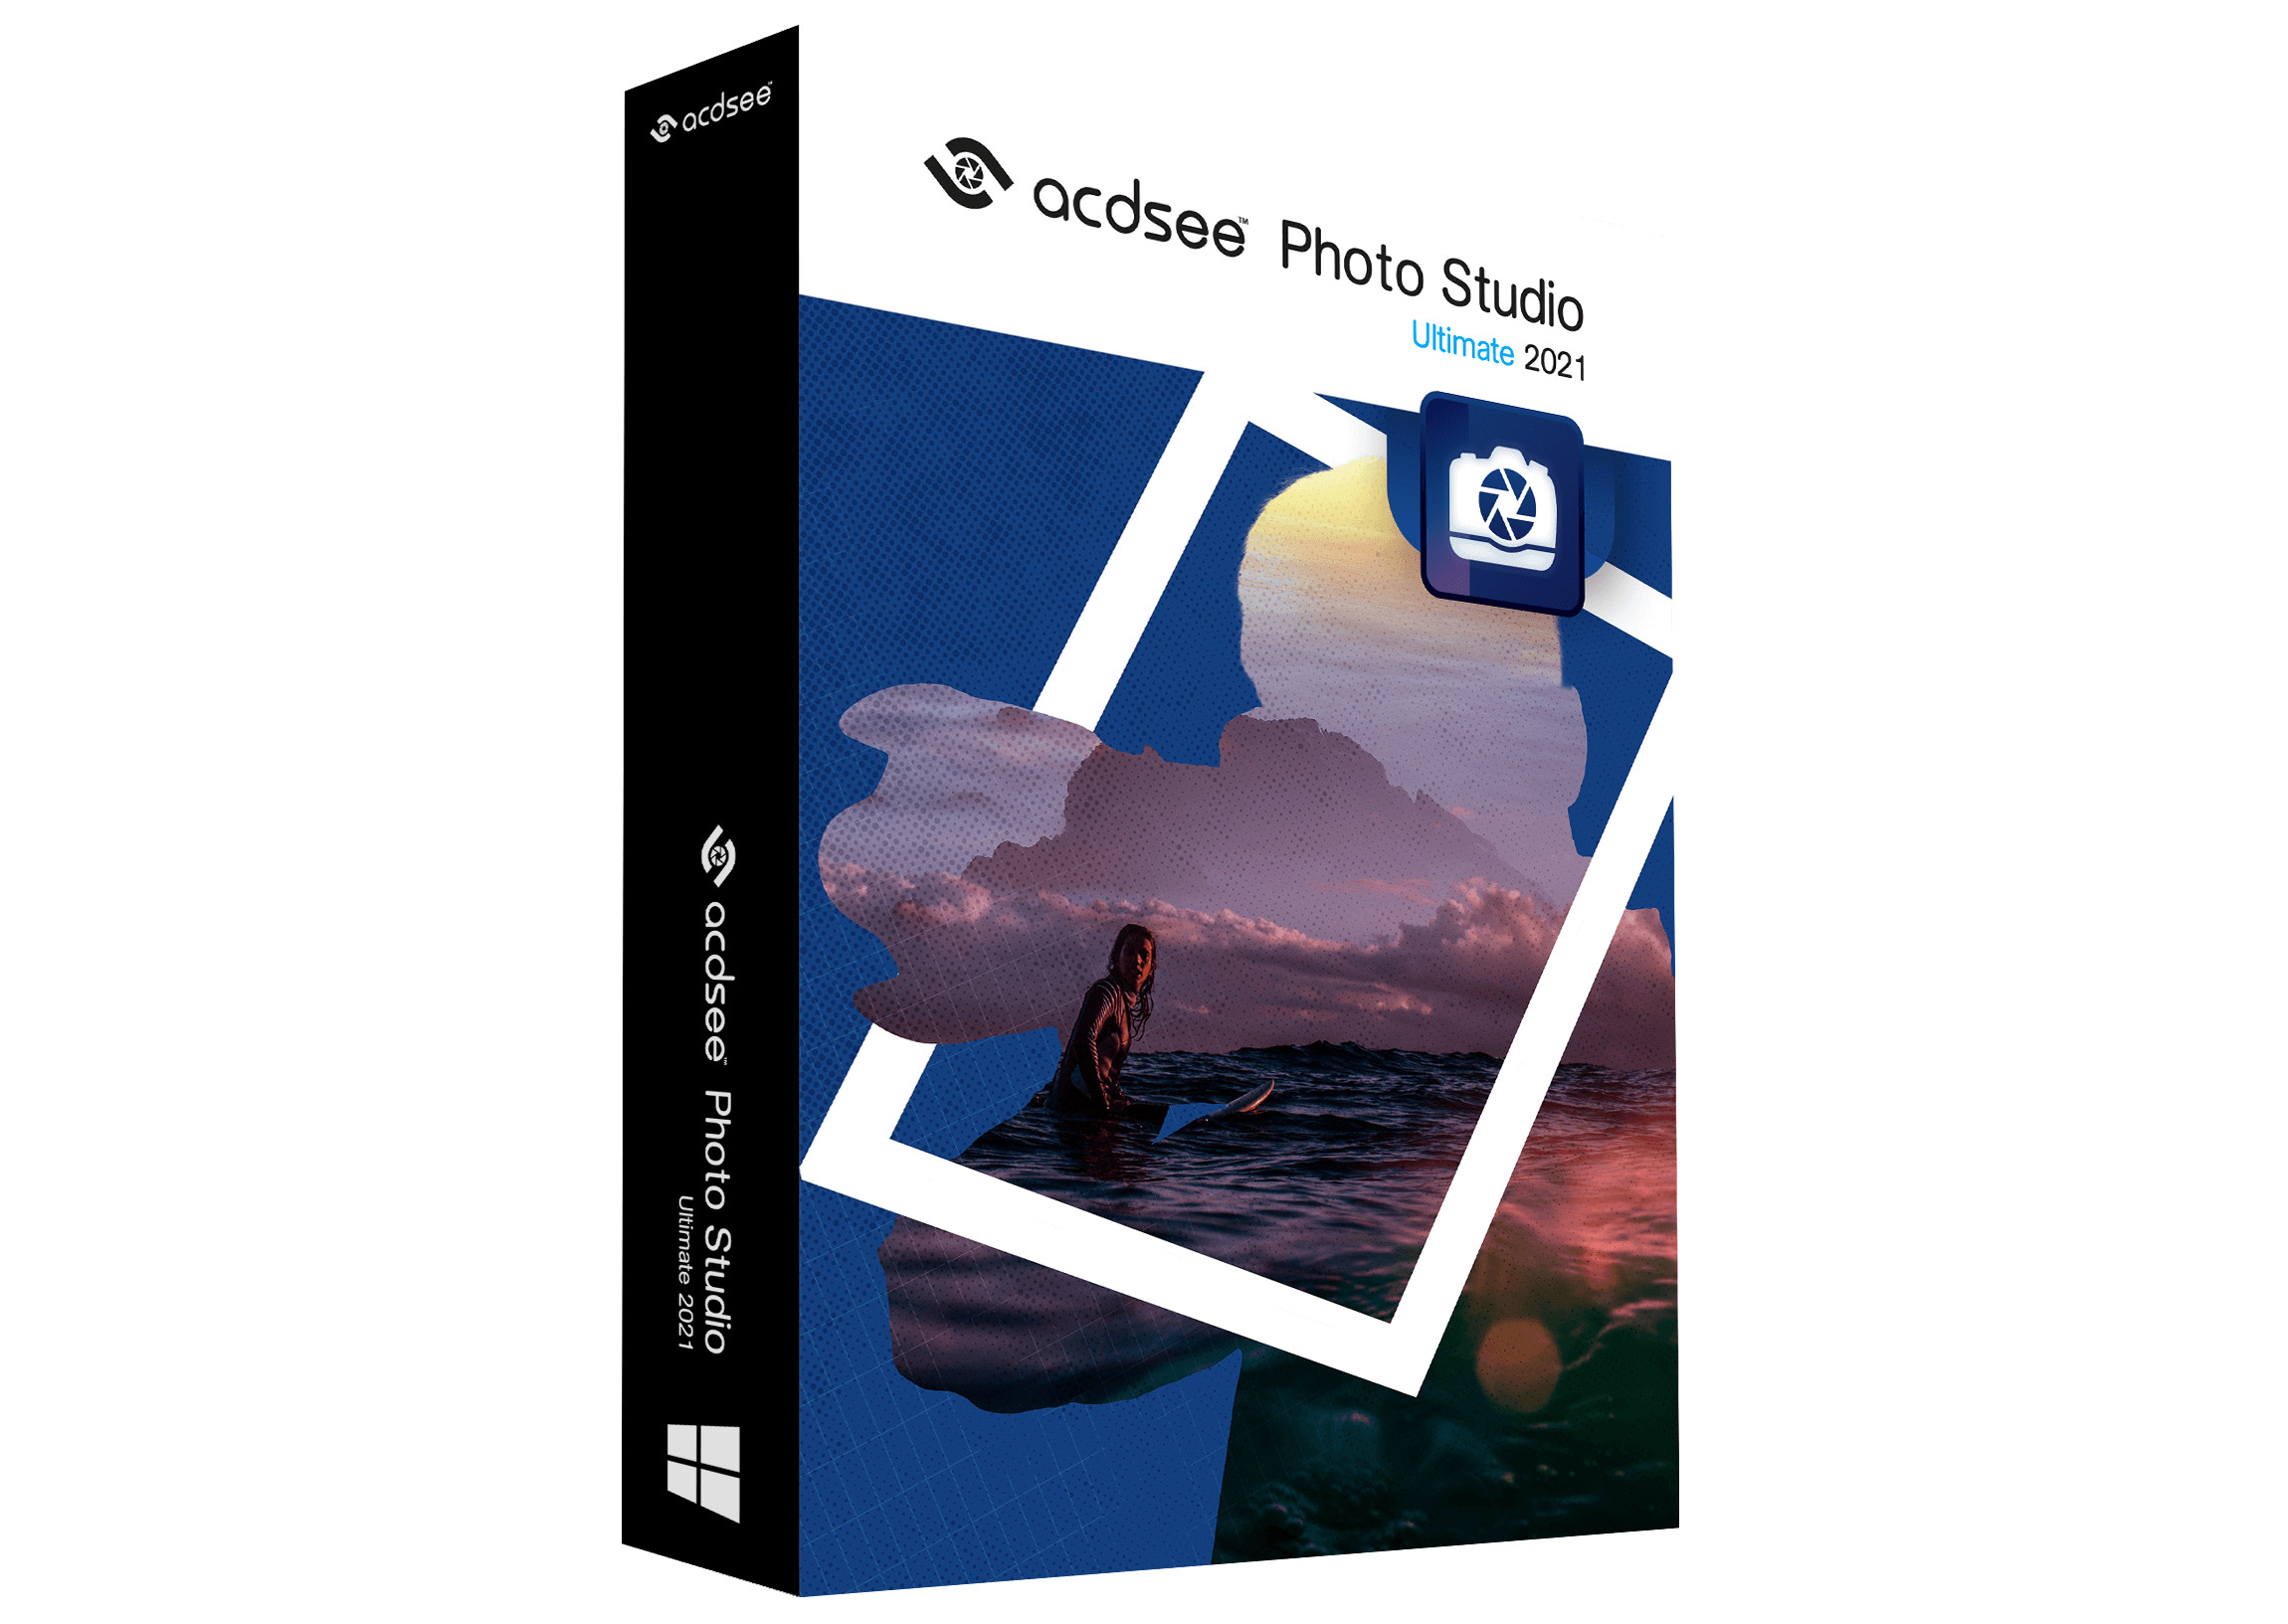 ACDSee Photo Studio Ultimate 2021 Key (6 Months / 1 PC) $11.29